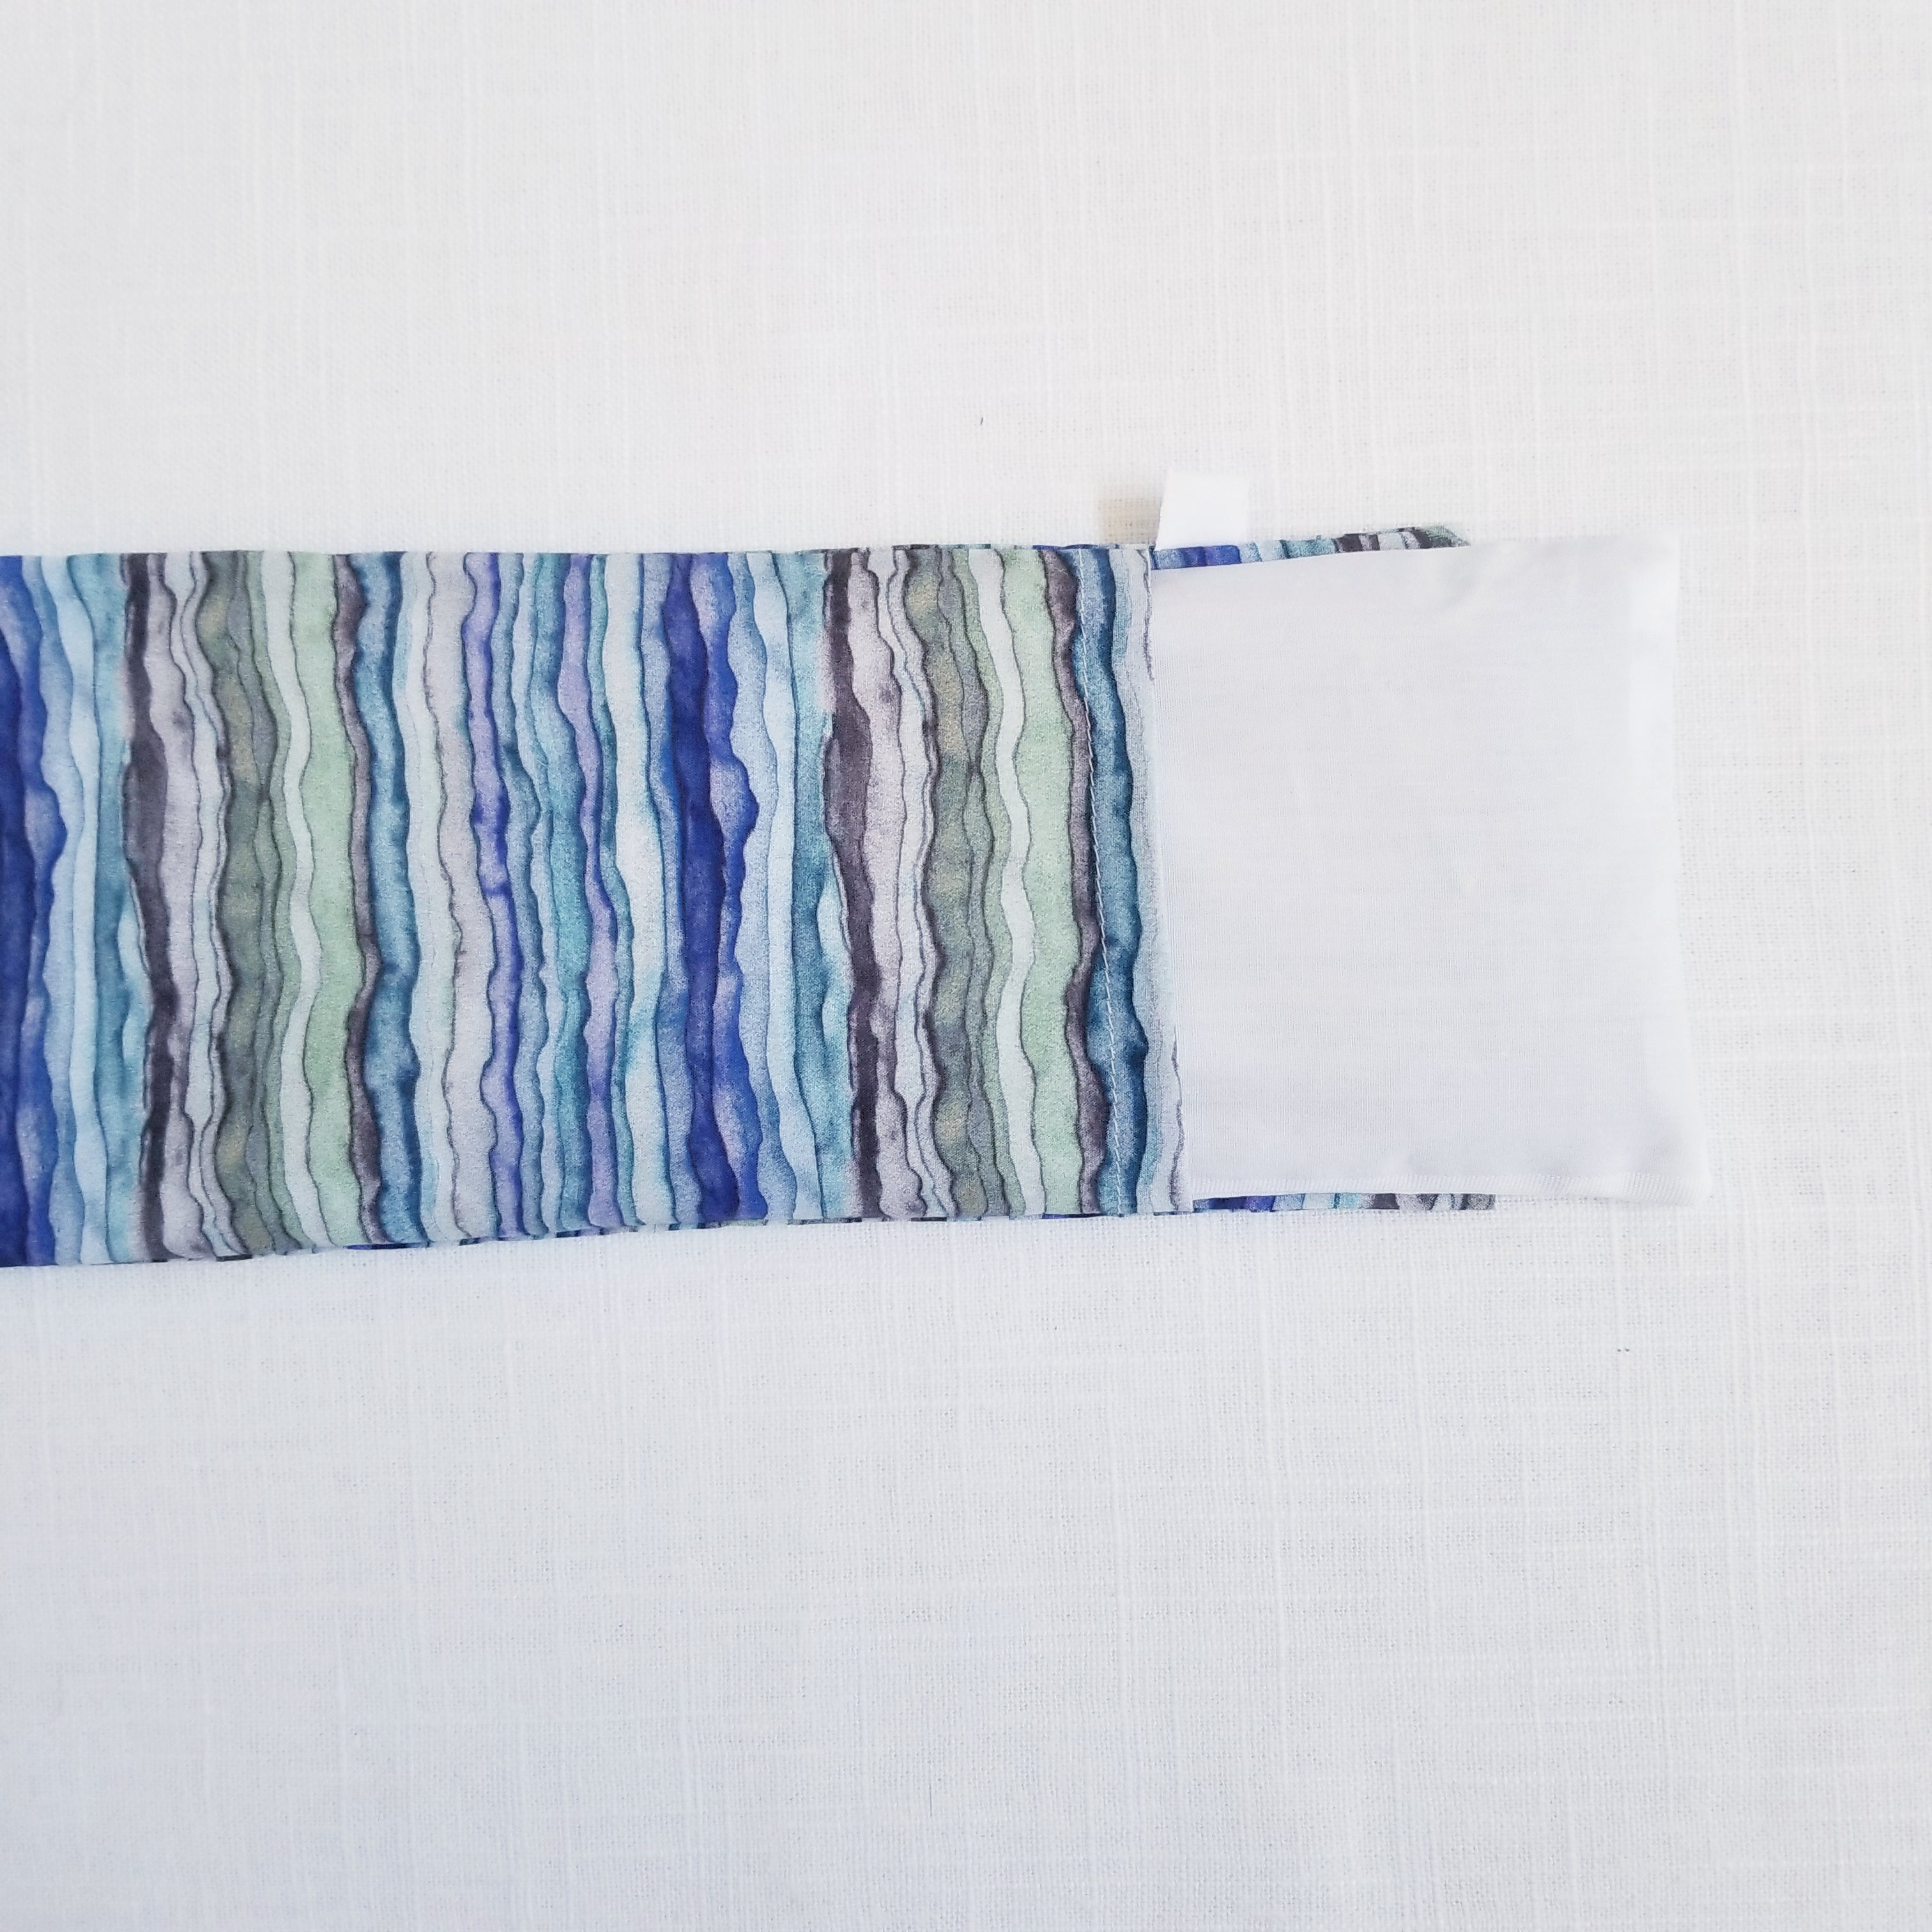 Weighted Eucalyptus Eye Pillow with Cotton Cover - Blue Watercolor Layers